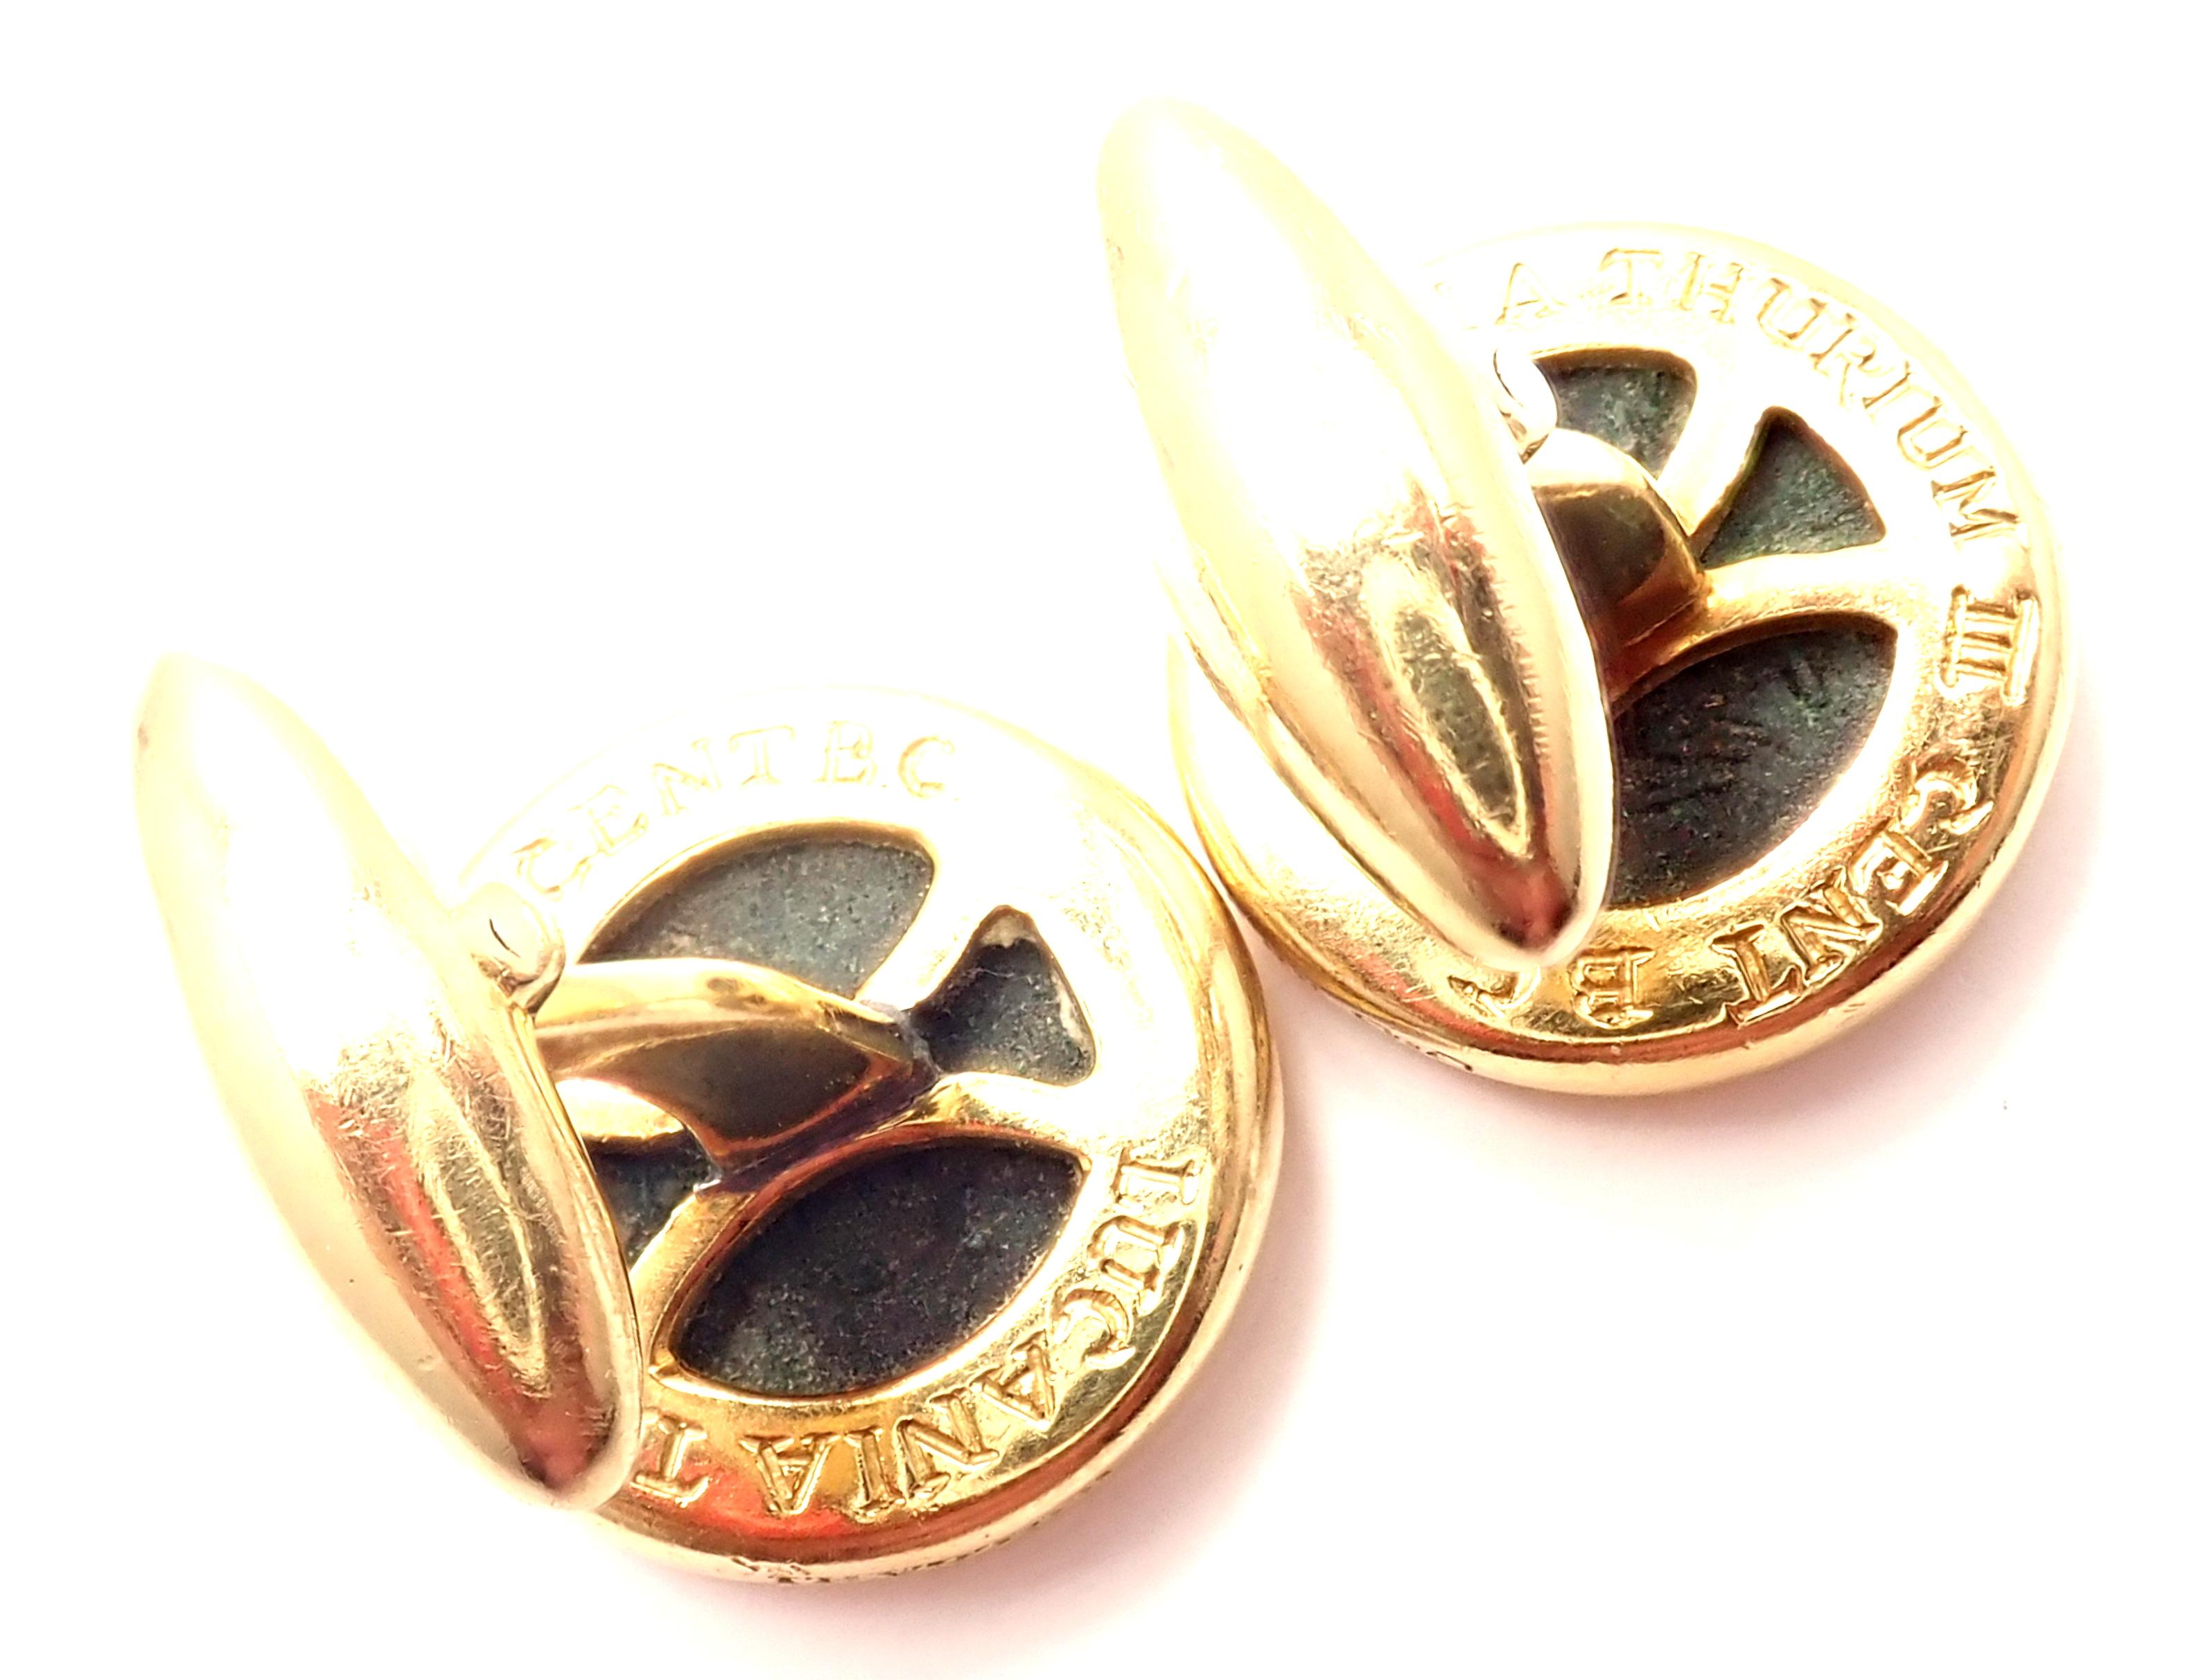 Bulgari Ancient Coin Yellow Gold Cufflinks In Excellent Condition For Sale In Holland, PA